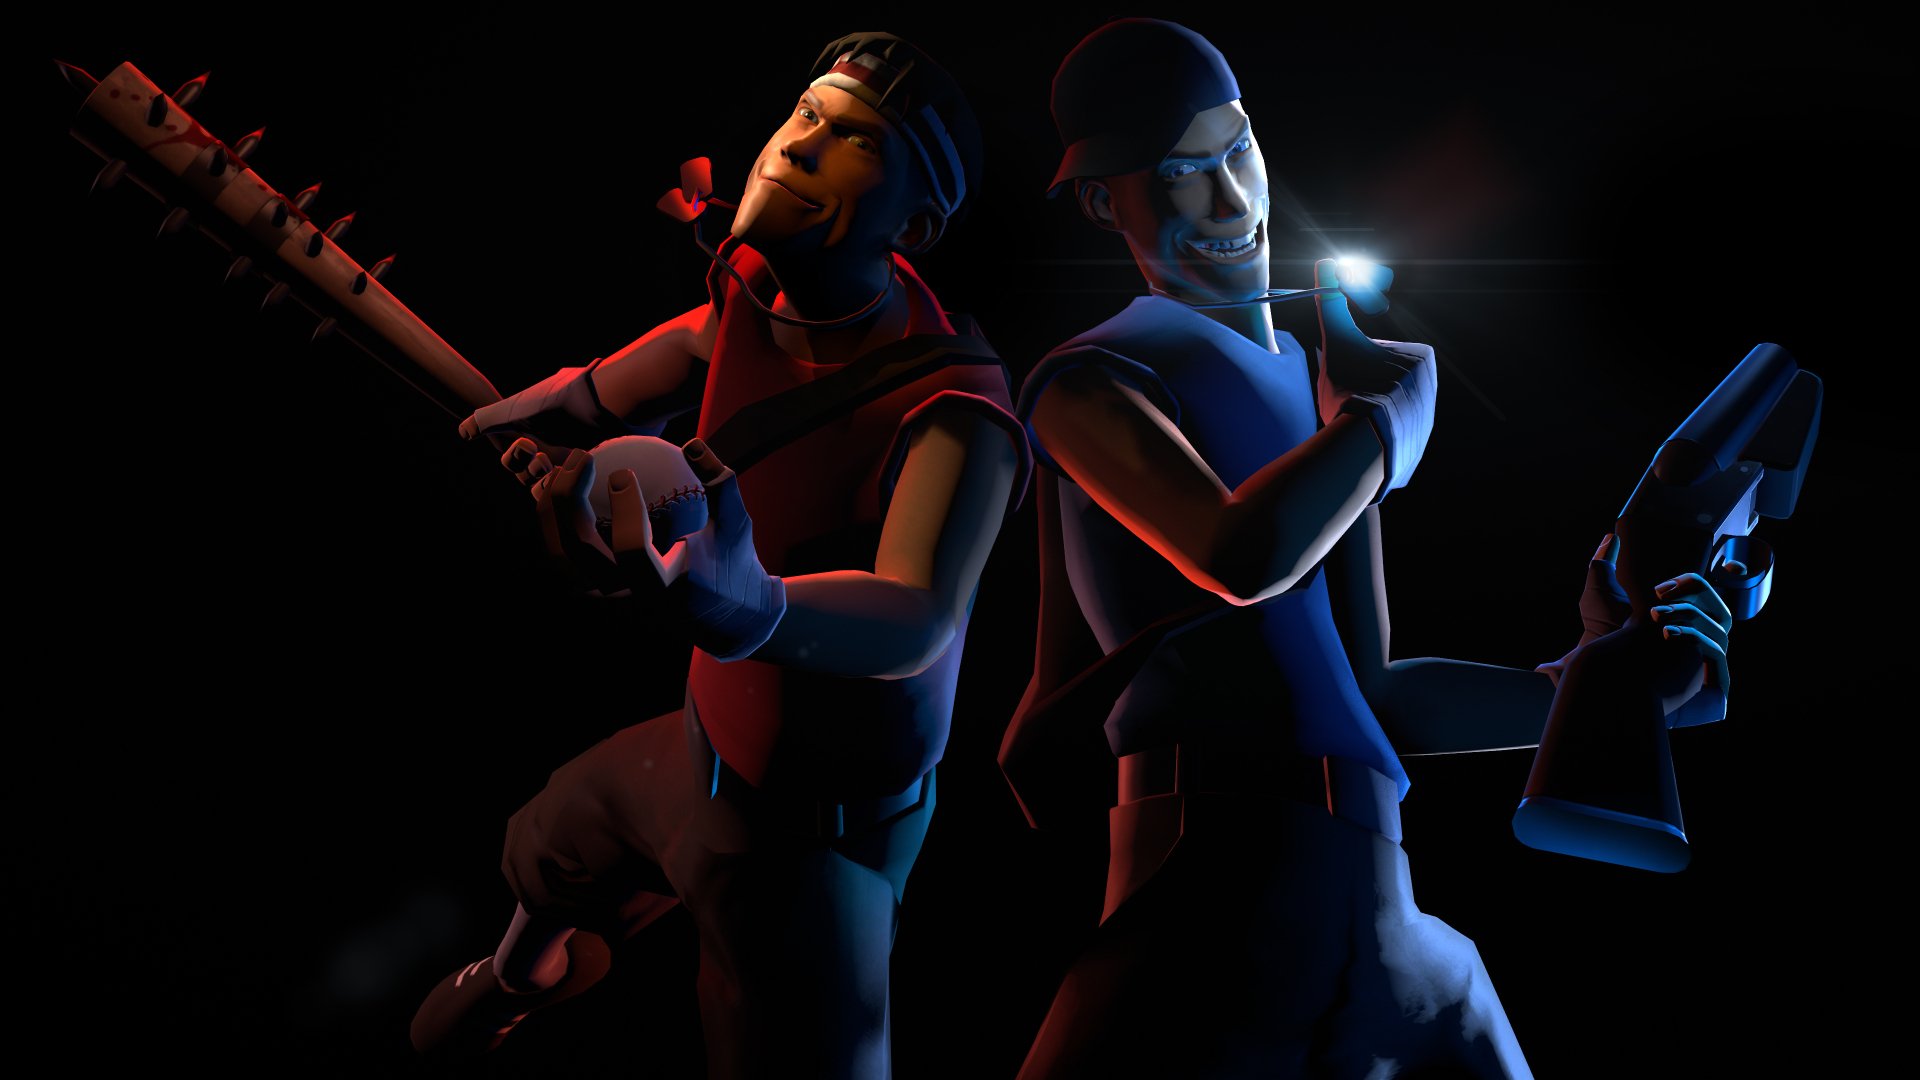 1440p team fortress 2 images